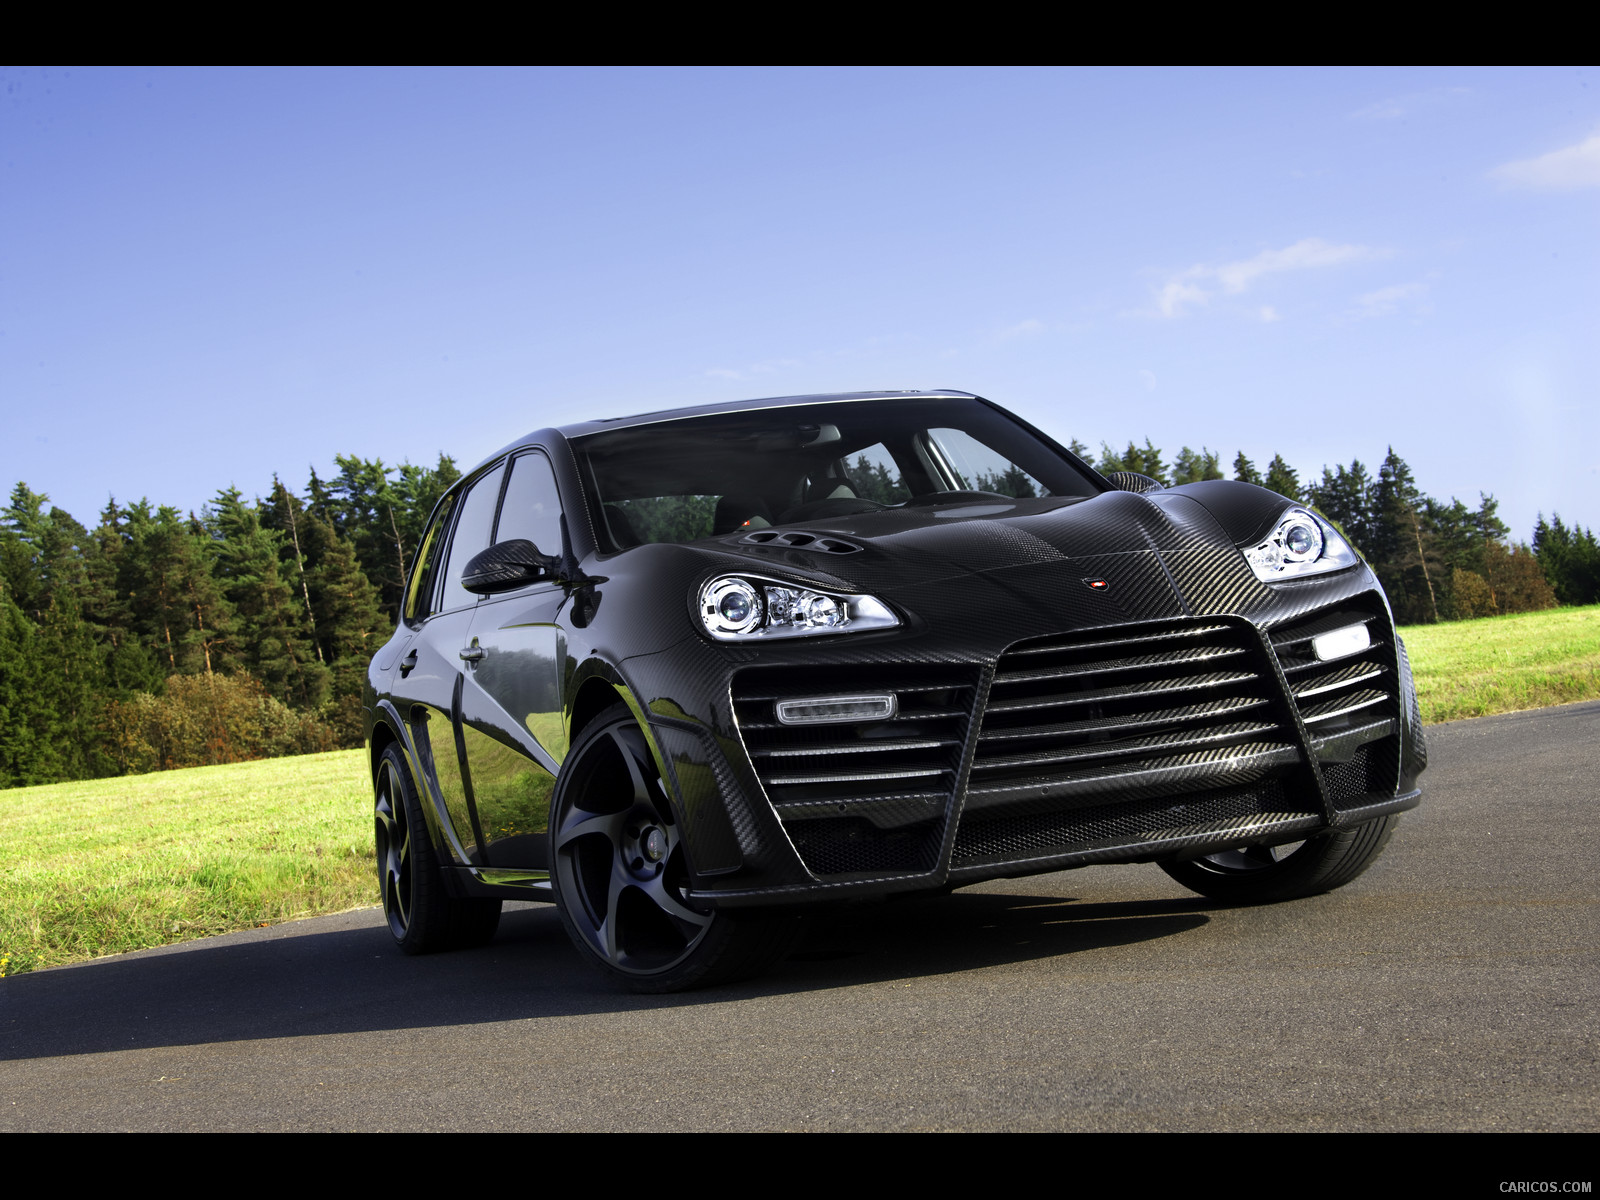 2009 Mansory Chopster based on Porsche Cayenne Turbo S  - Front, #4 of 38